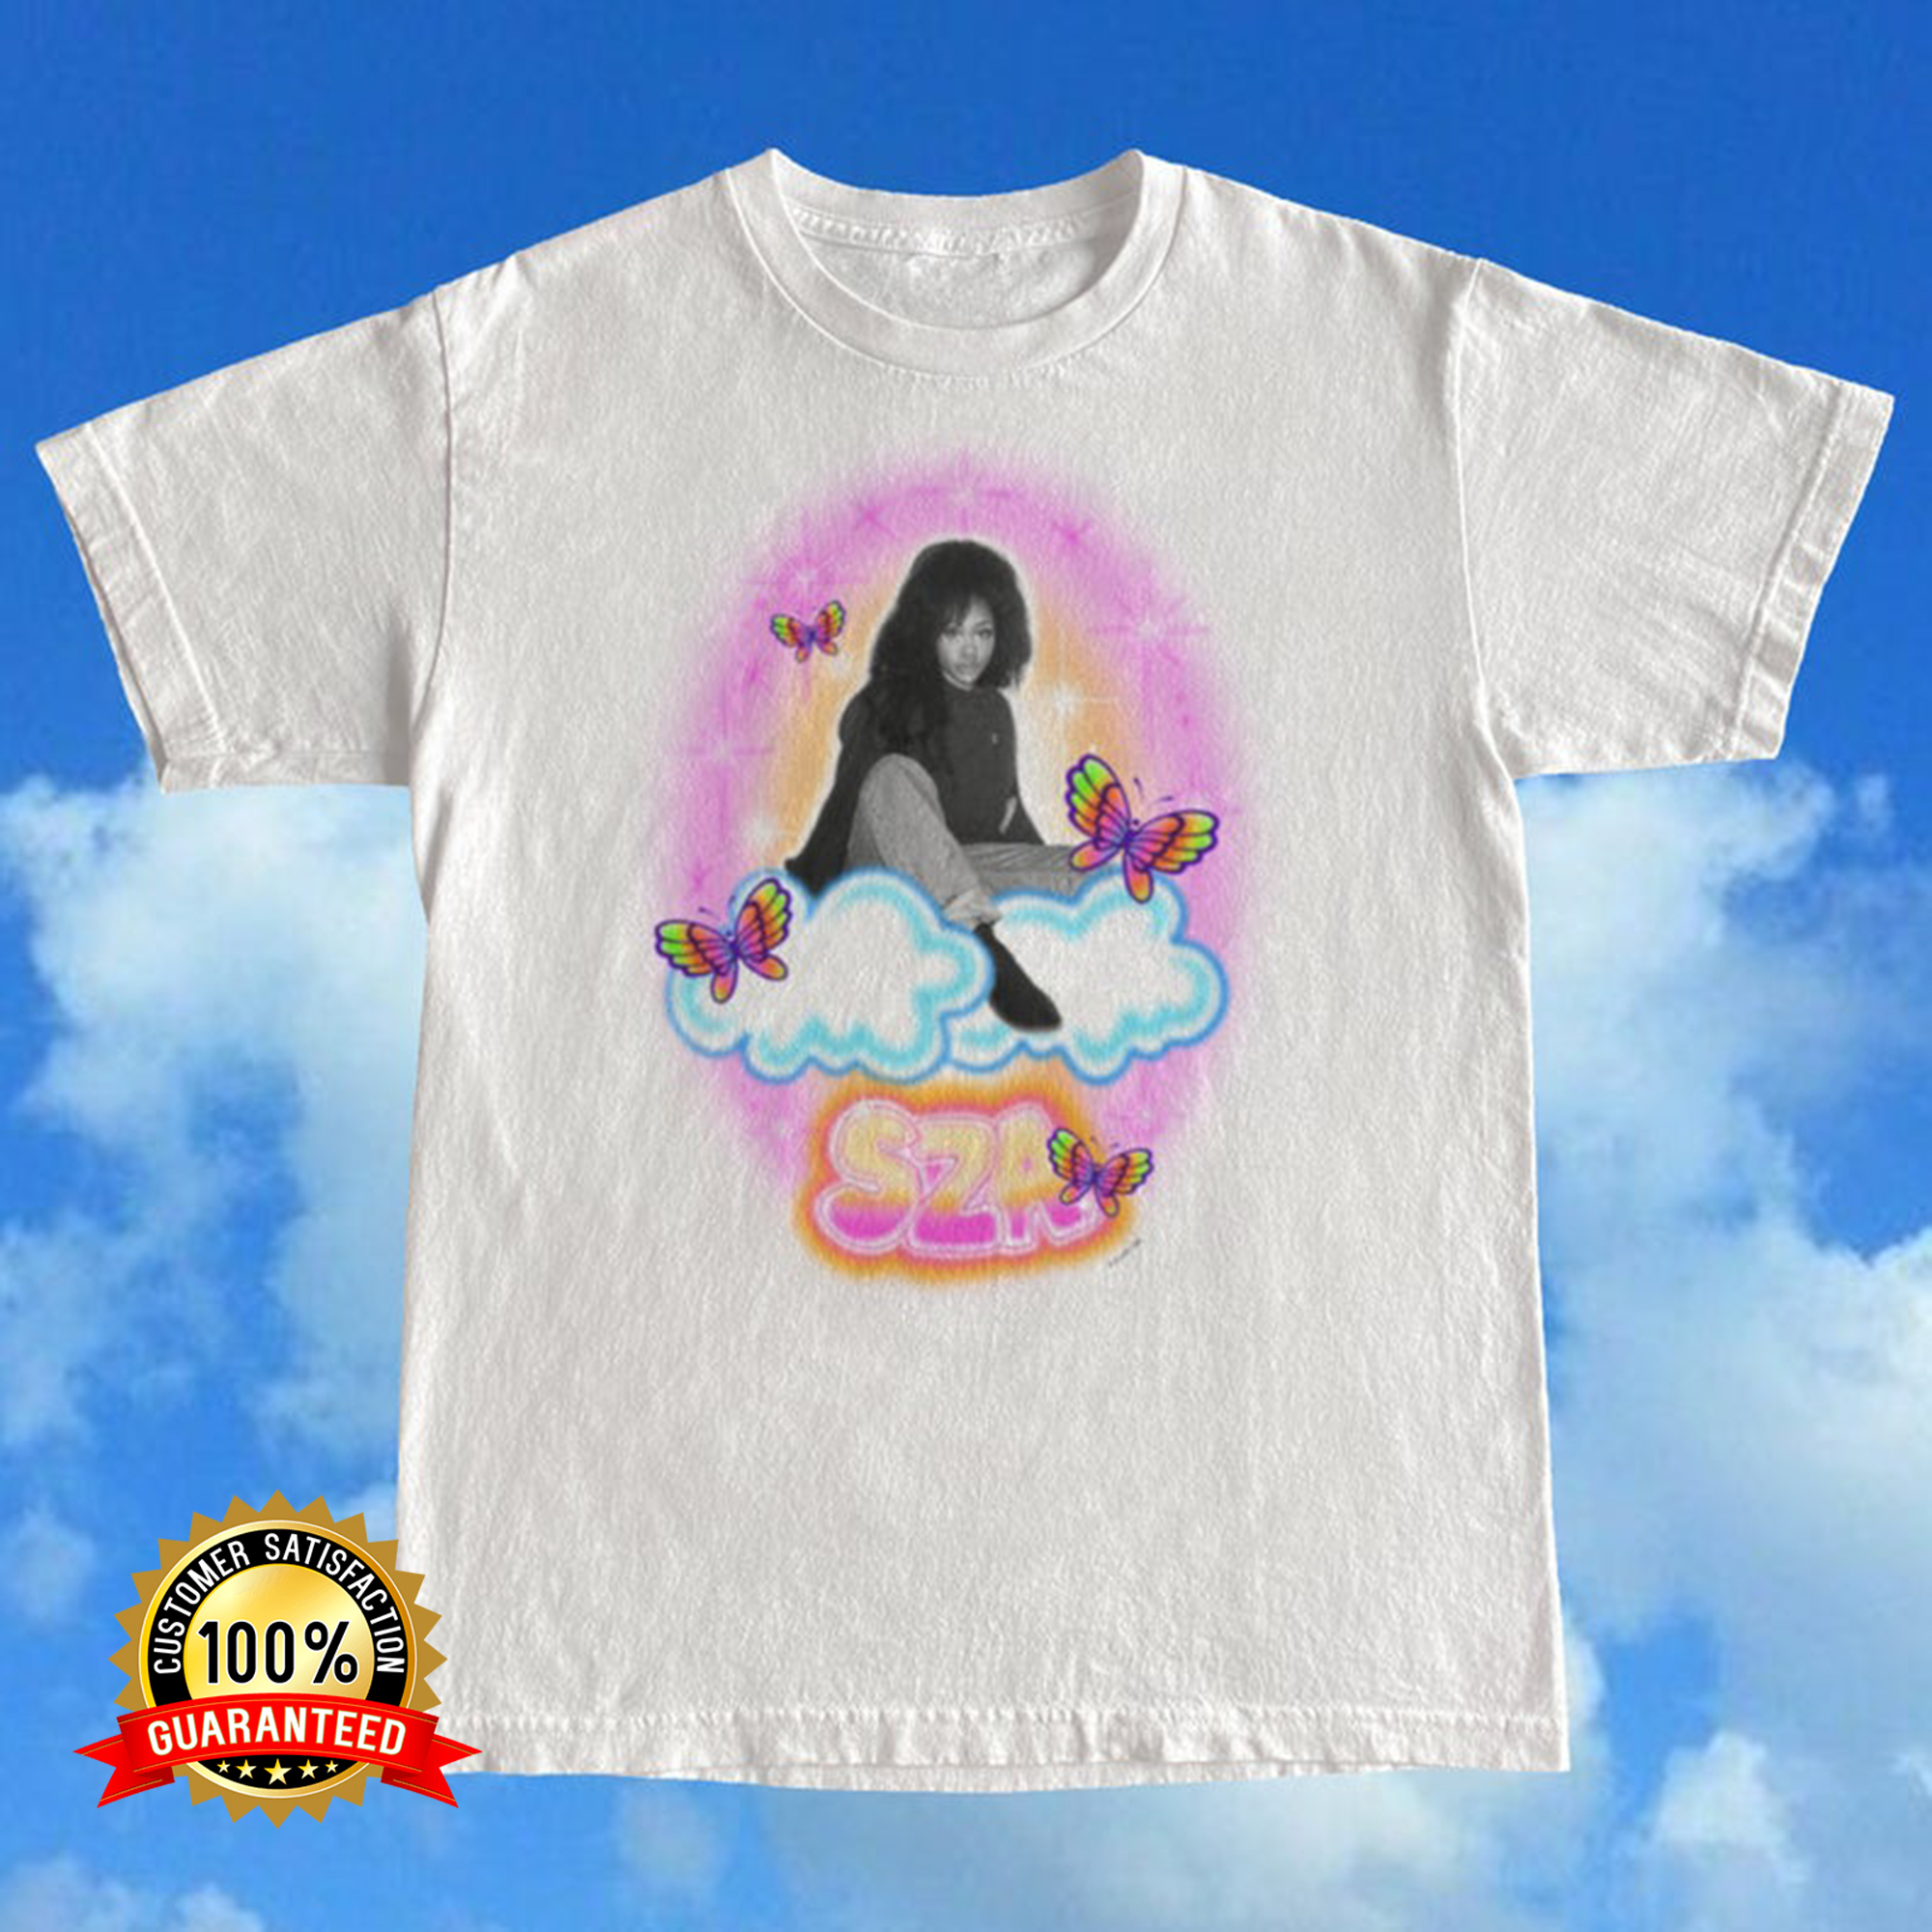 Official SZA Gear: Elevate Your Style with Official Merch